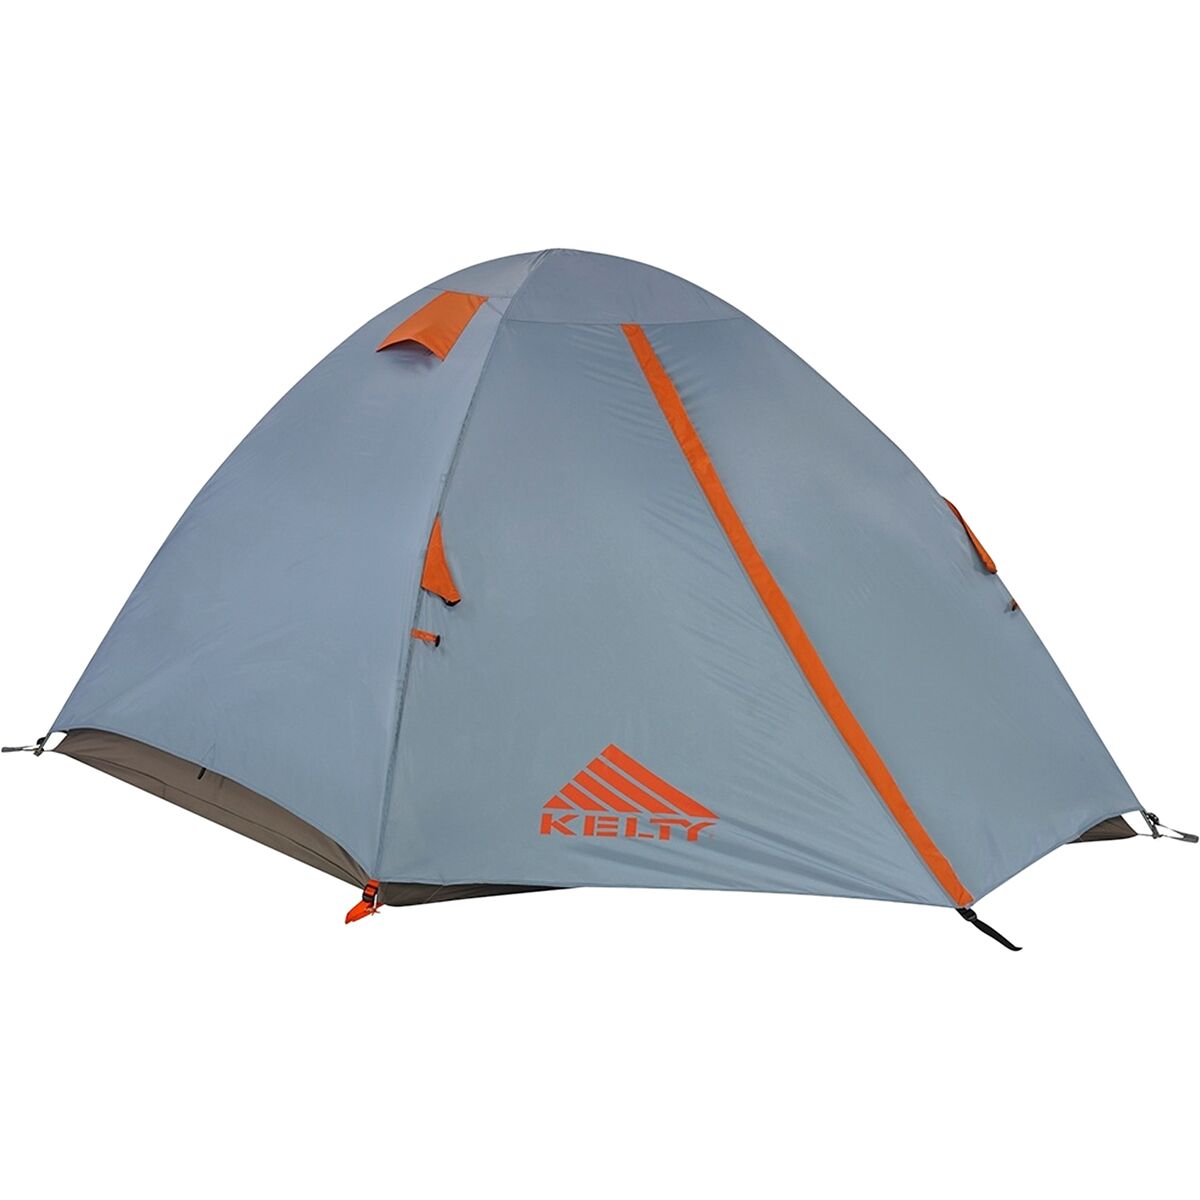 Kelty Outfitter Pro 3 Tent: 3-Person 3-Season